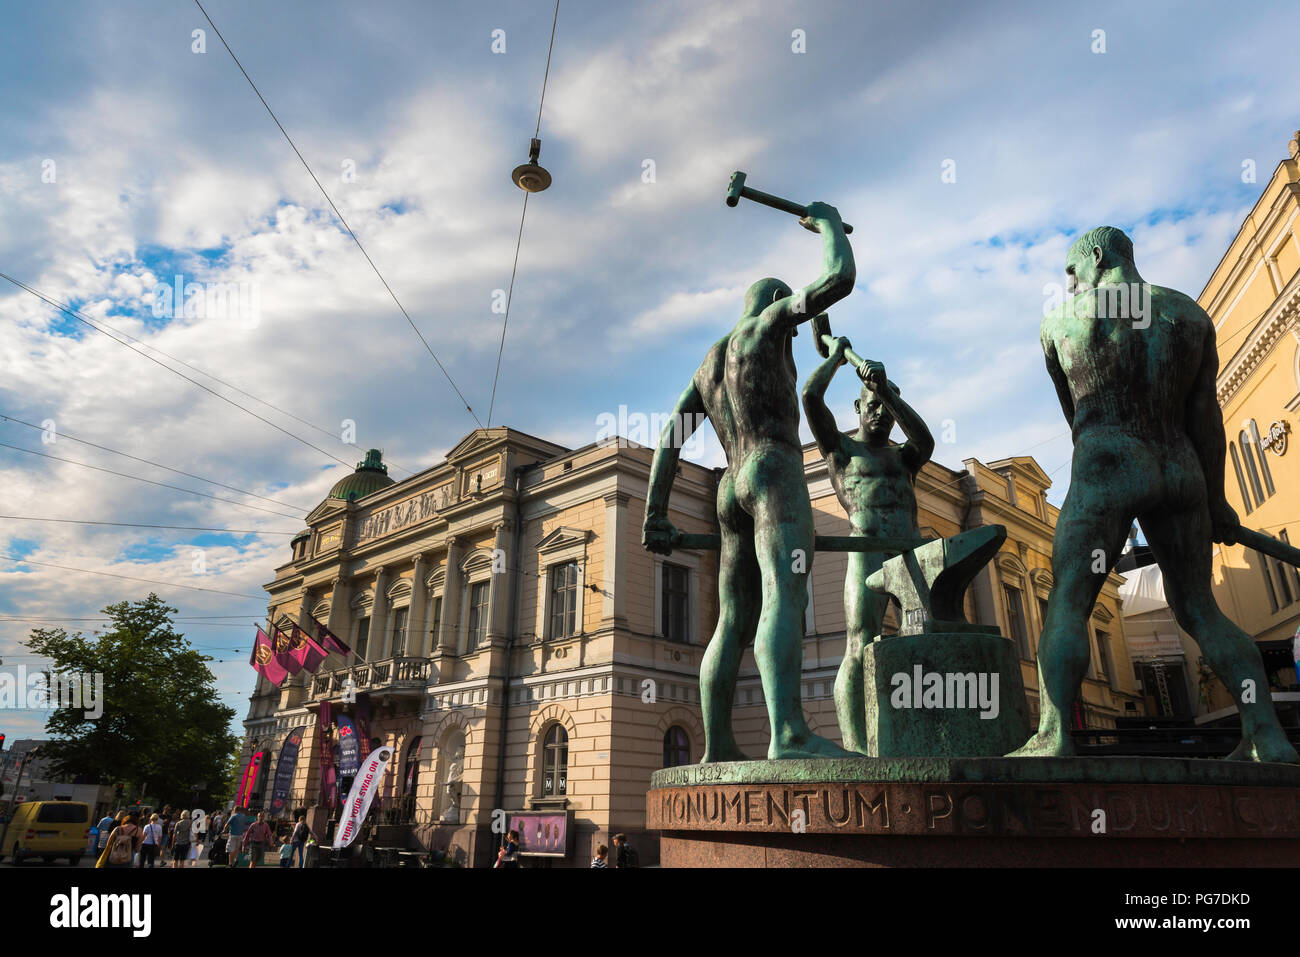 Helsinki Finland, the famous statue titled 'The Three Smiths' sited between Aleksanterinkatu and Mannerheimintie in Helsinki city center, Finland. Stock Photo